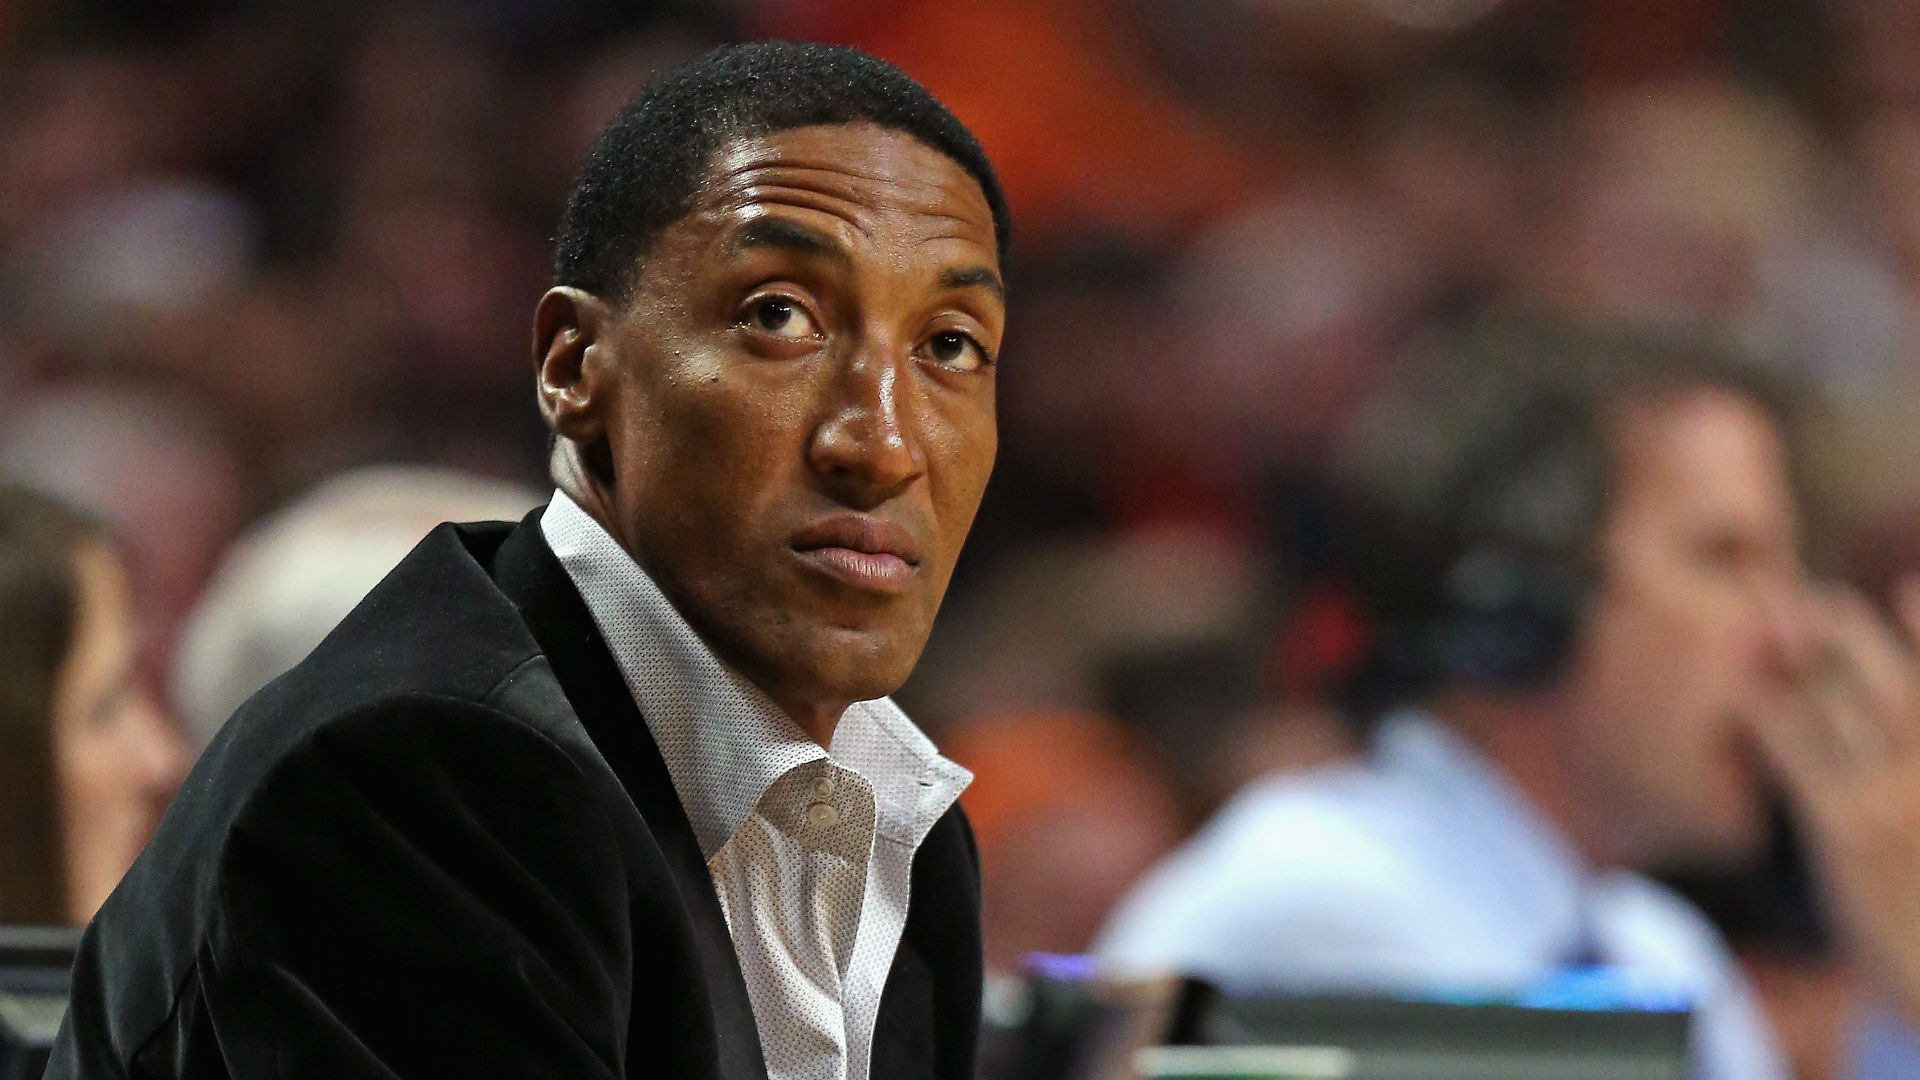 Scottie Pippen accused LeBron James of not being willing to have the ball in the hands when the Lakers need him to step up.